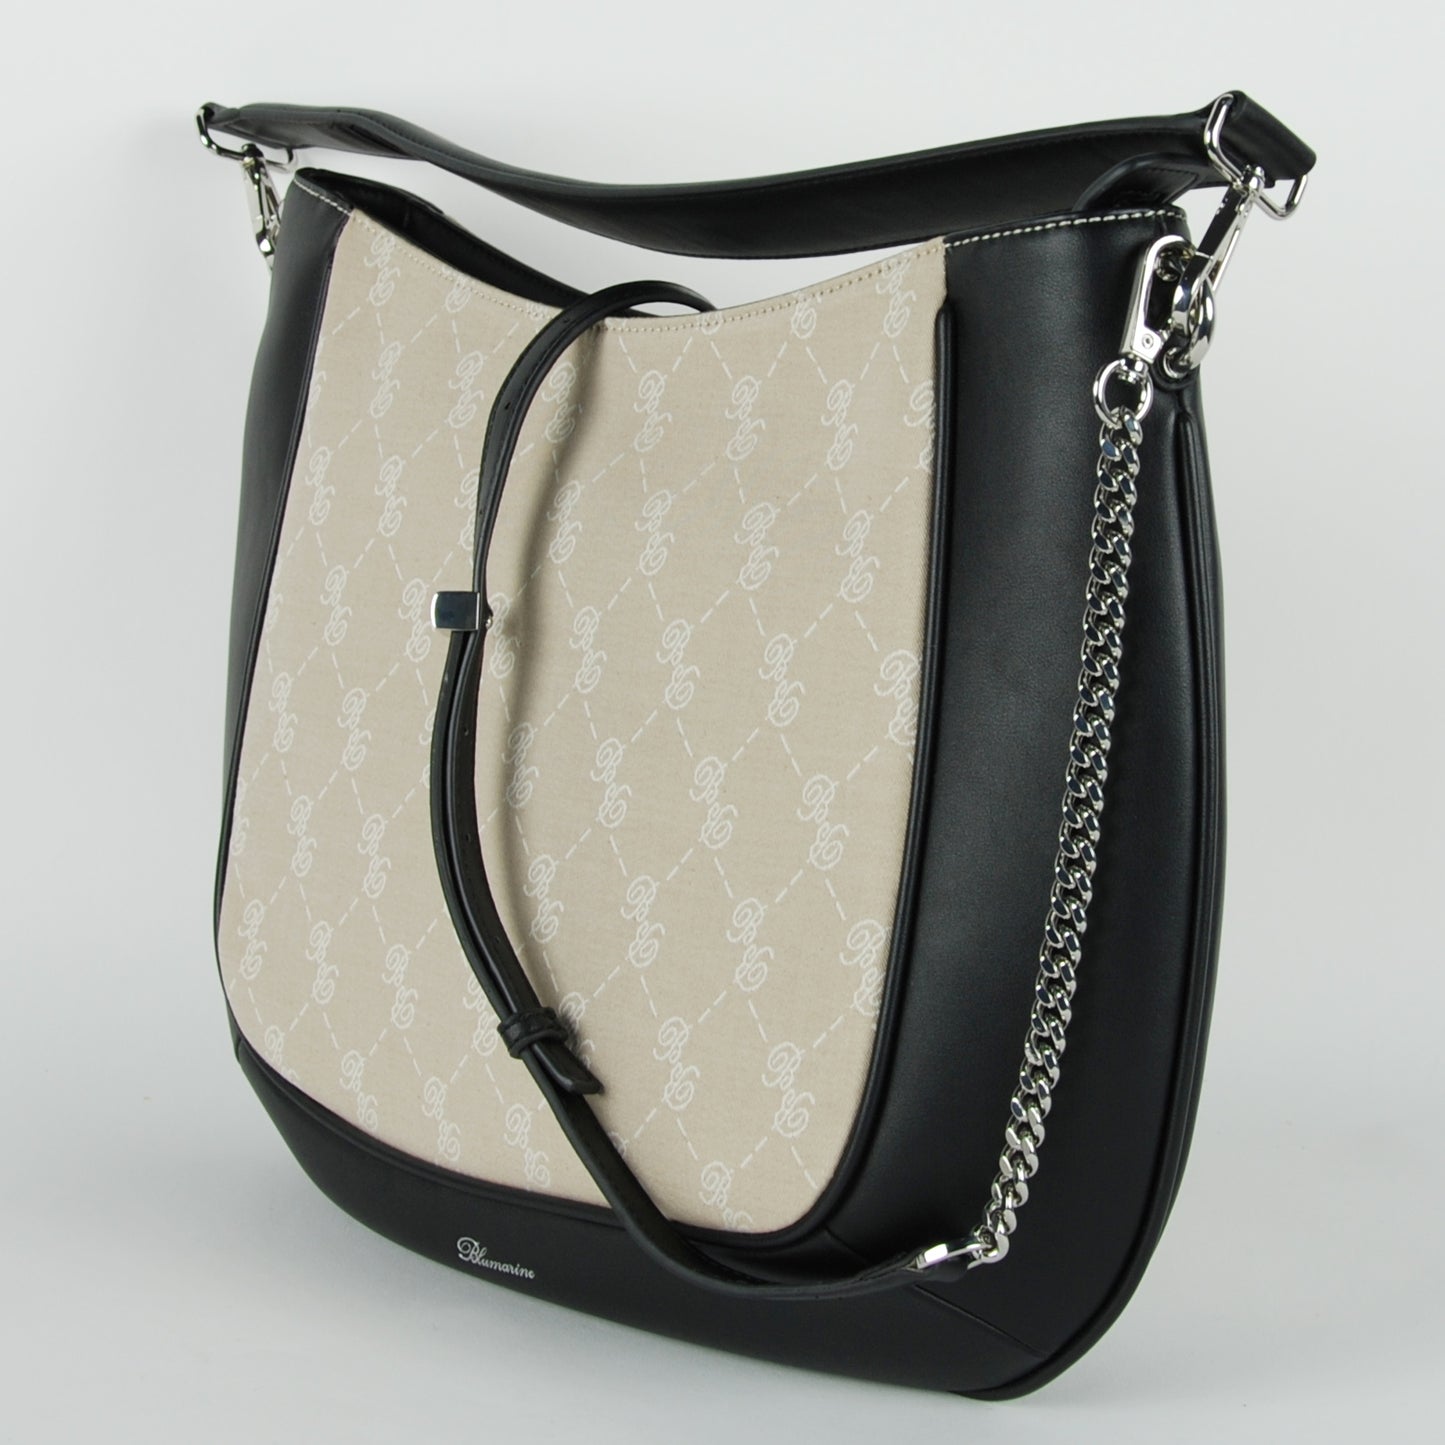 Black Bag with a Beige Insert